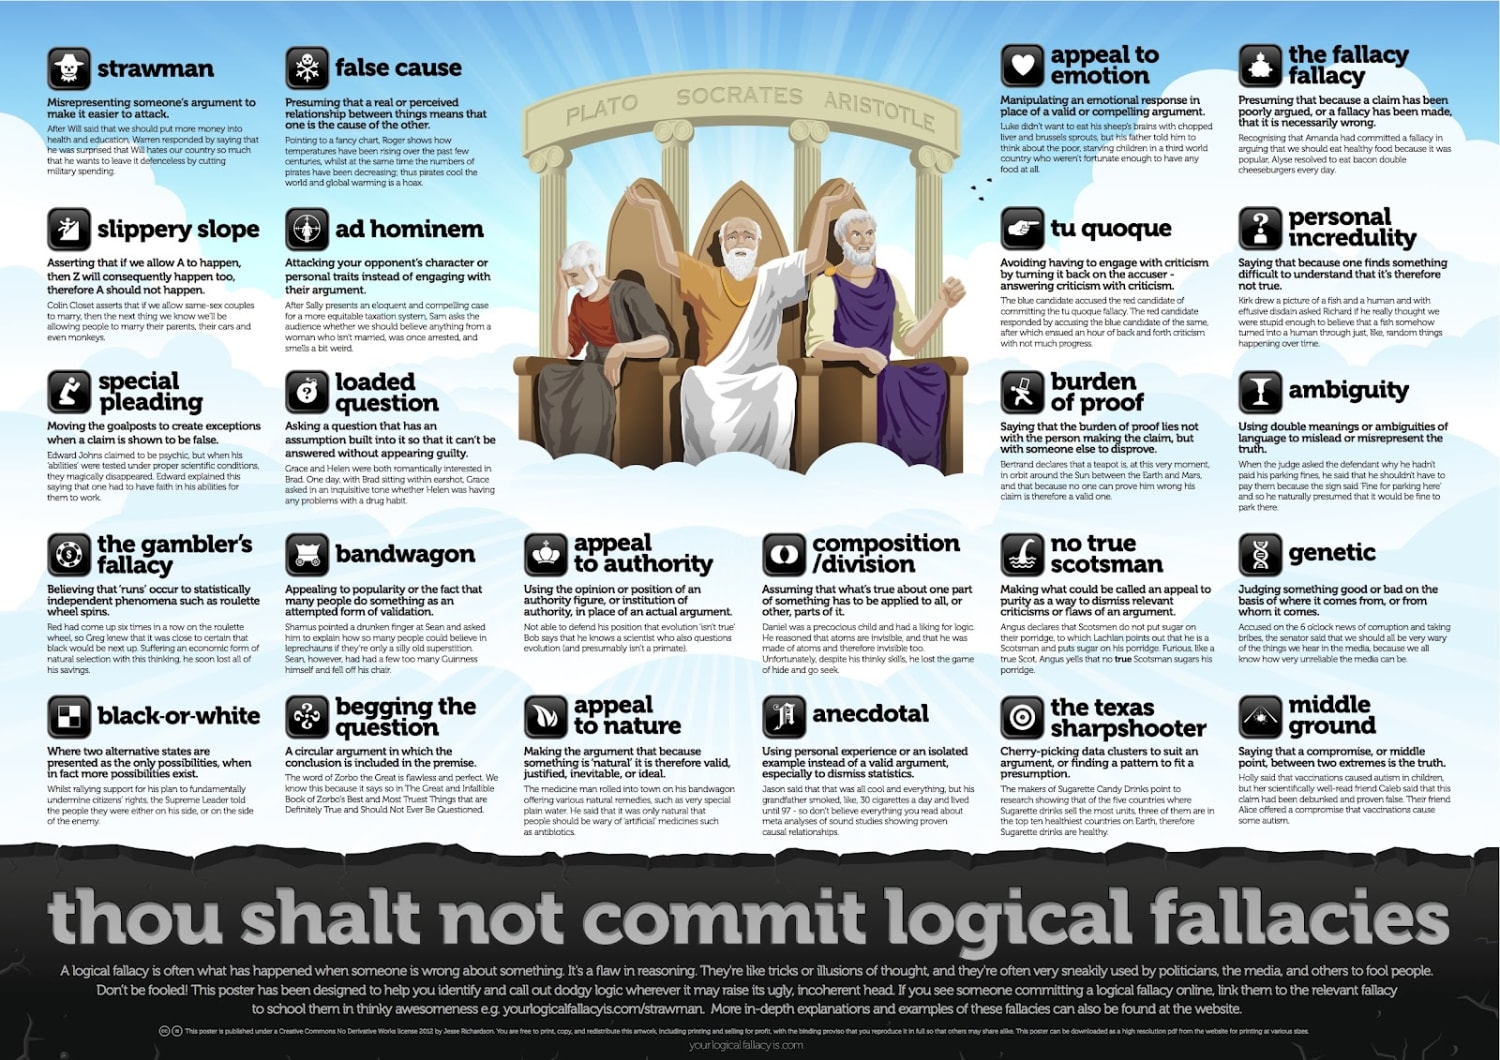 Logical Fallacies list, found in guidelines for posts 4chan Politically Incorrect 4chan.org/pol/